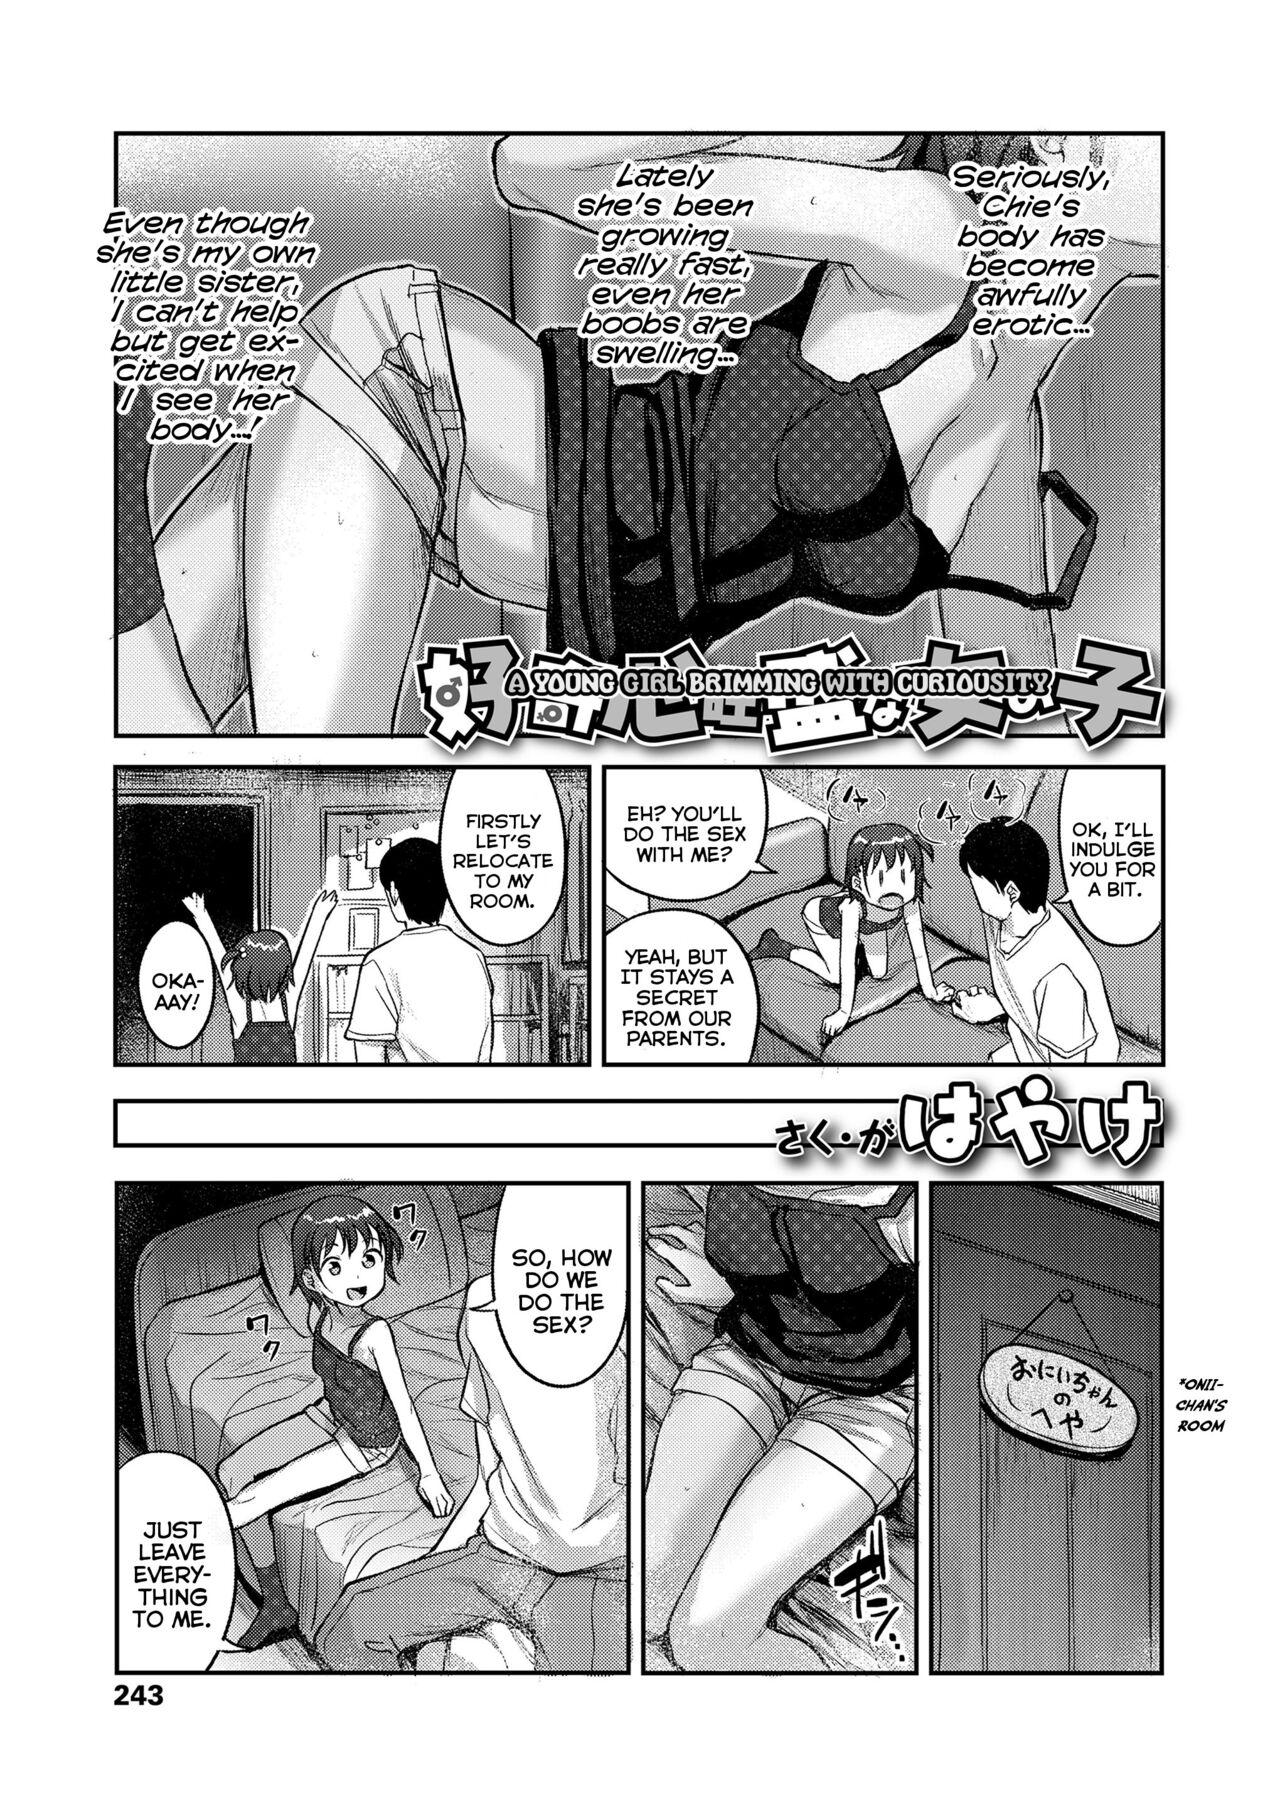 Gay Boy Porn Koukishin Ousei na Onnanoko | A Young Girl Brimming With Curiousity Massage Sex - Page 3